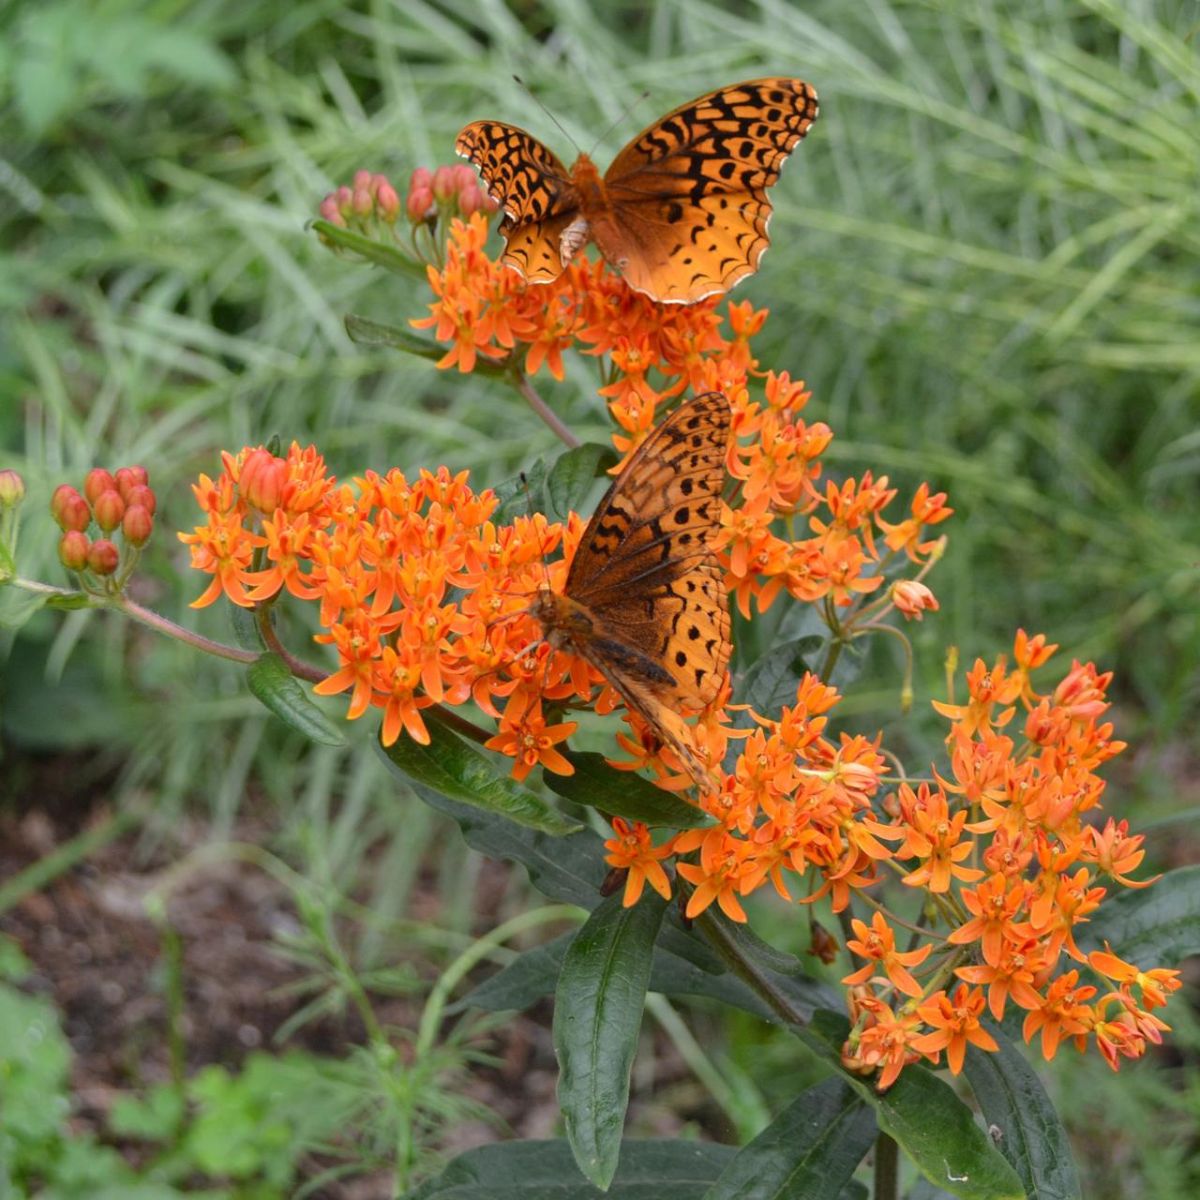 Attract butterflies to your garden with Butterfly Weed on Thursd